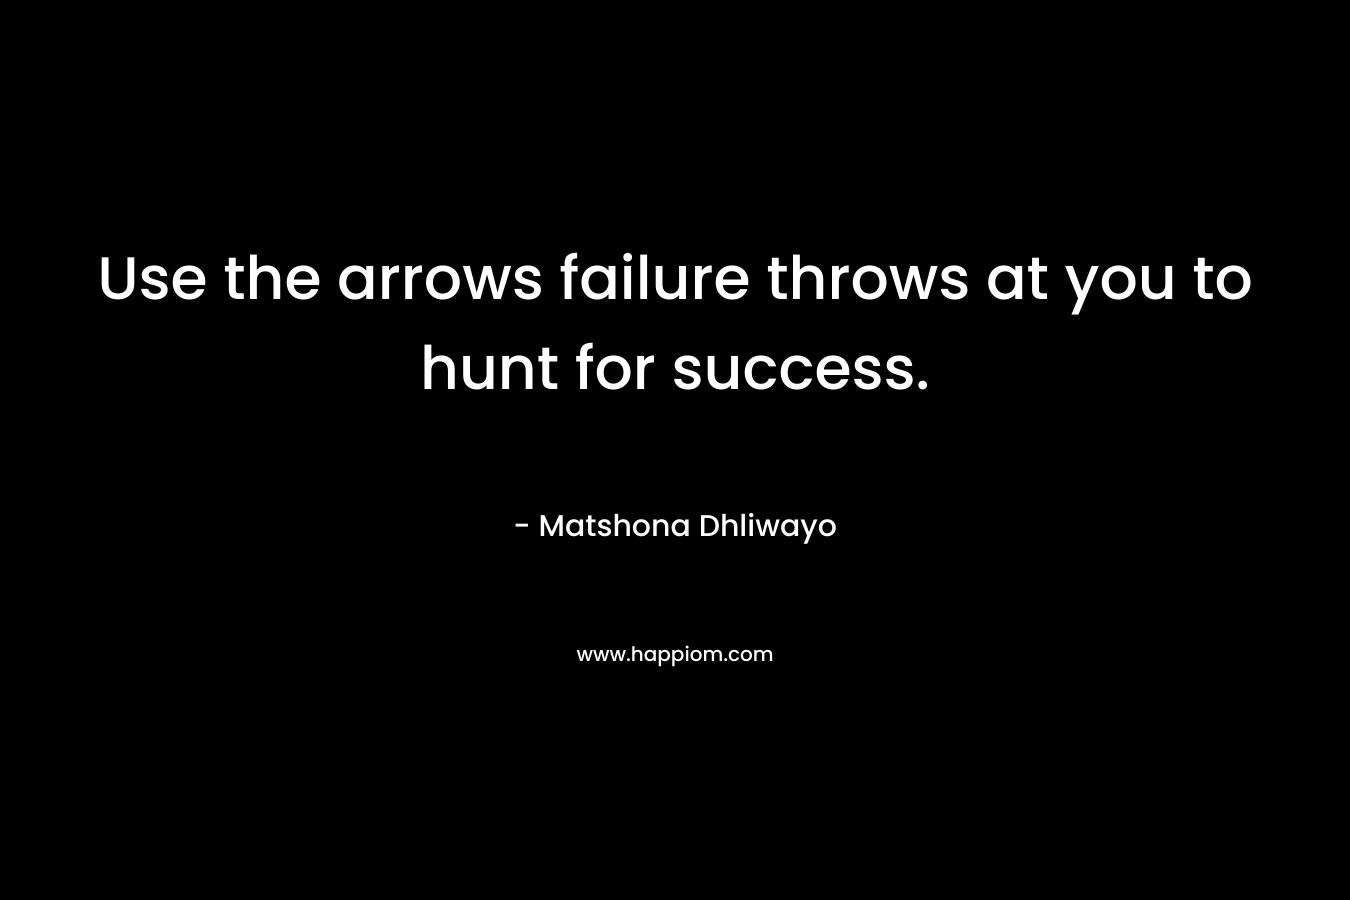 Use the arrows failure throws at you to hunt for success.